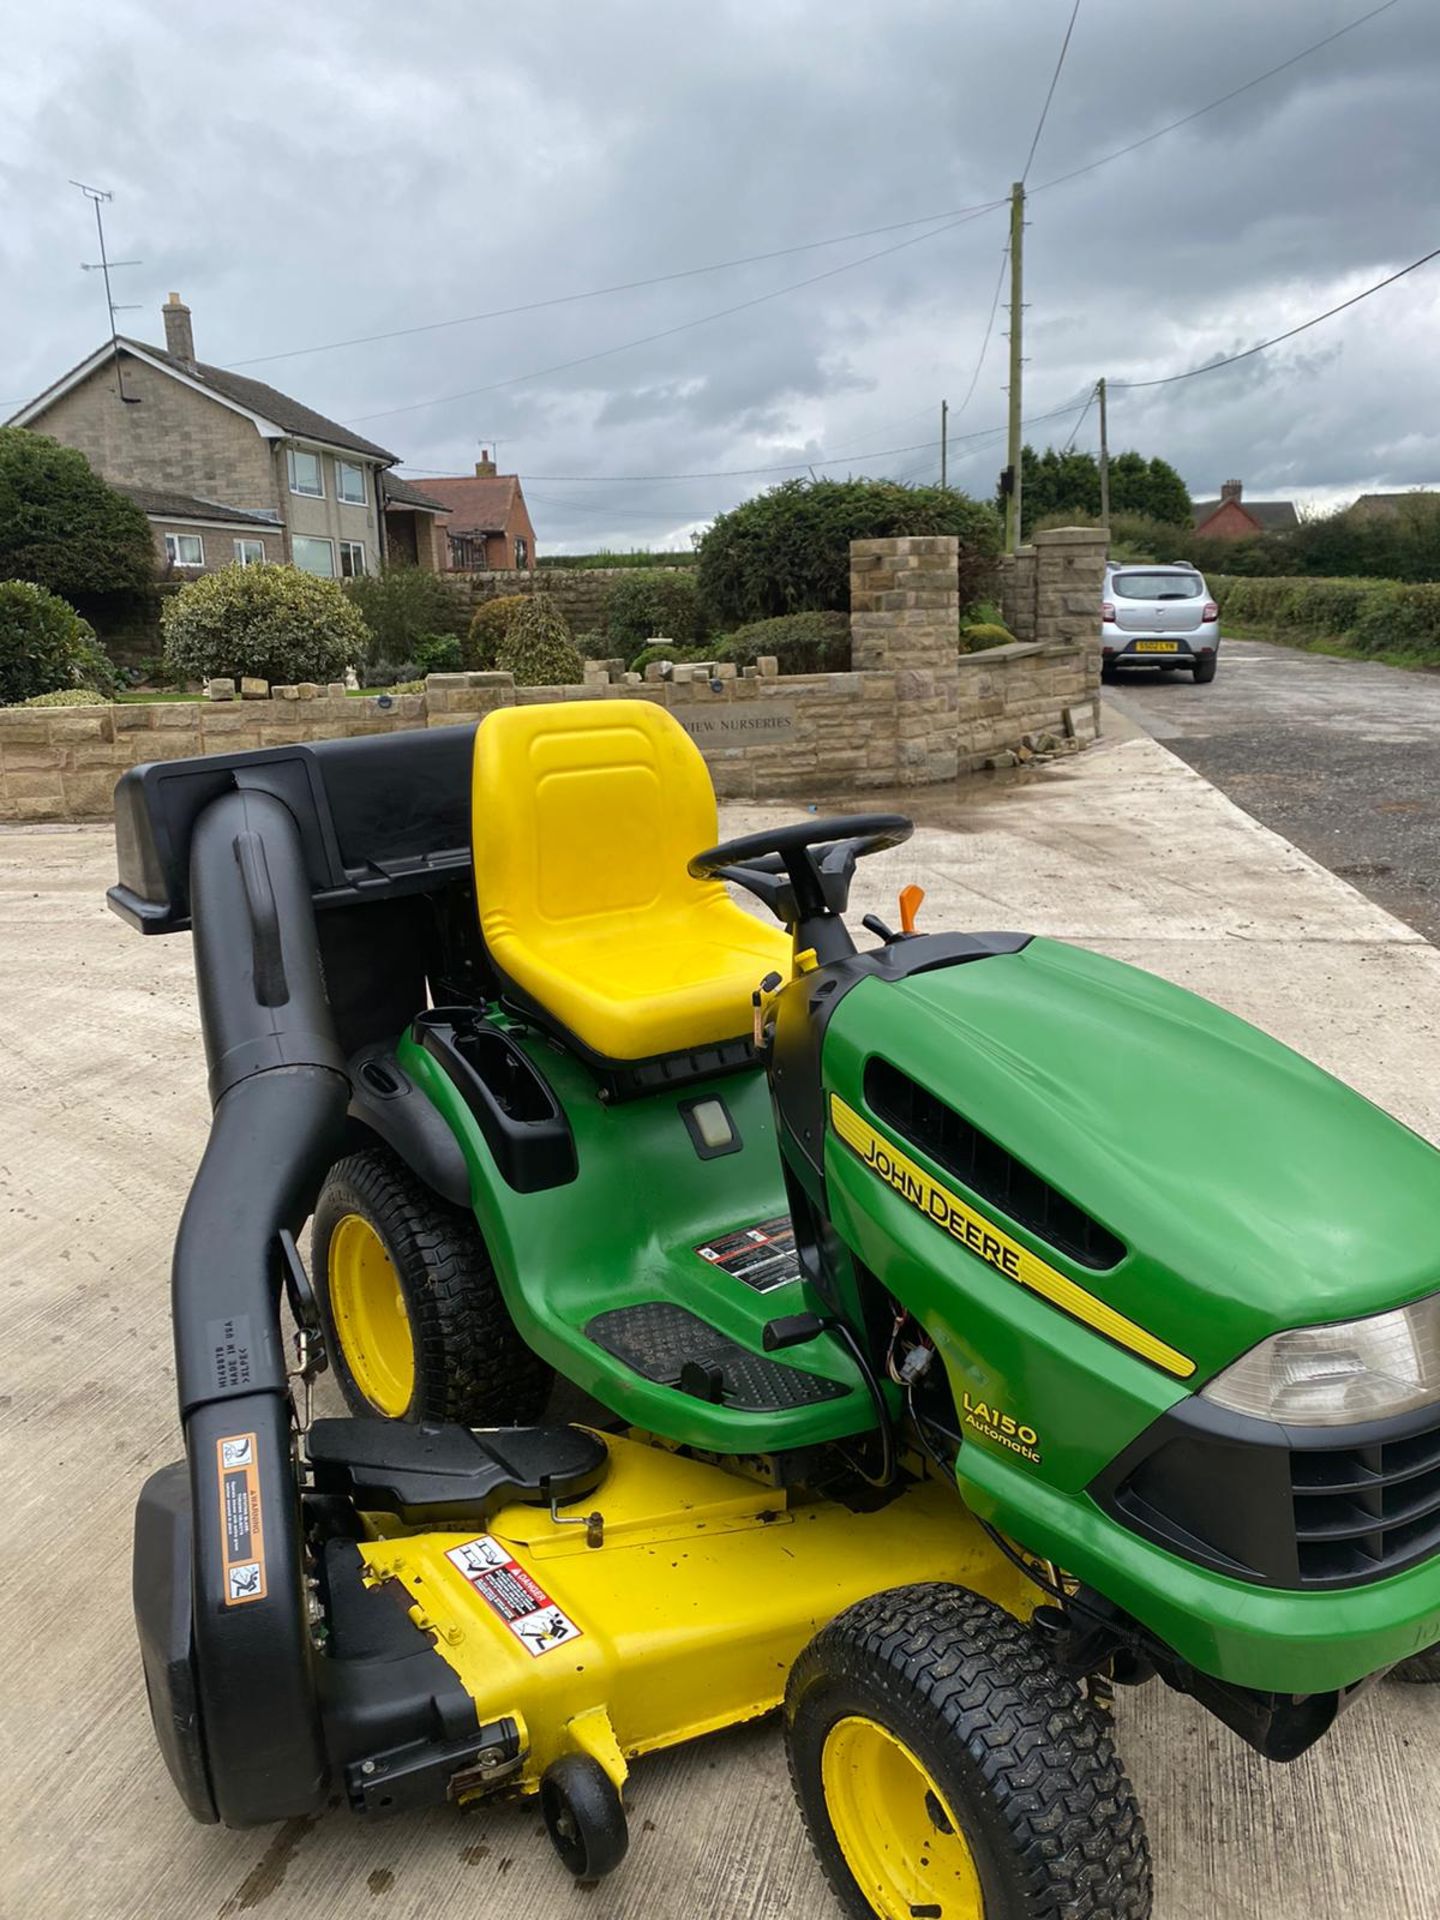 JOHN DEERE LA150 RIDE ON LAWN MOWER, RUNS AND WORKS WELL, 54 INCH CUTTING DECK *NO VAT* - Image 3 of 7